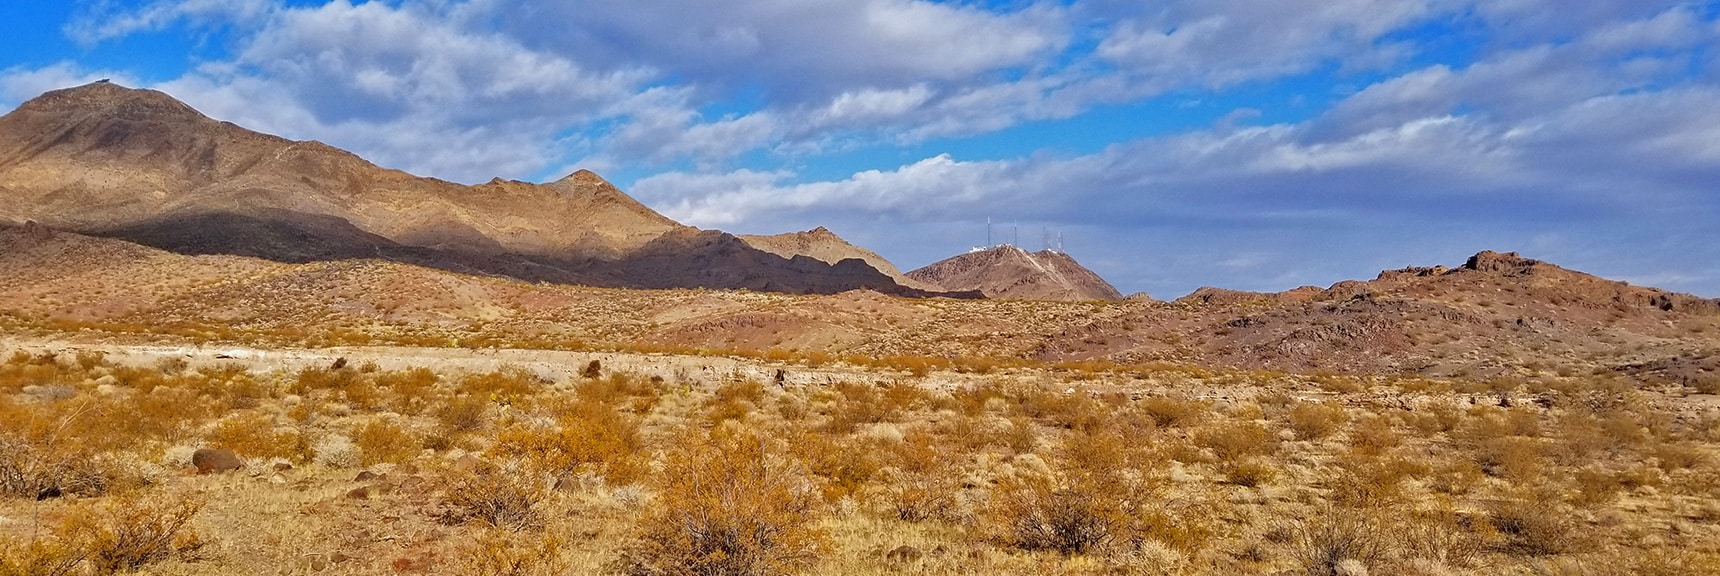 View Back Toward the Trailhead Marked by Communication Towers | McCullough Hills Trail in Sloan Canyon National Conservation Area, Nevada